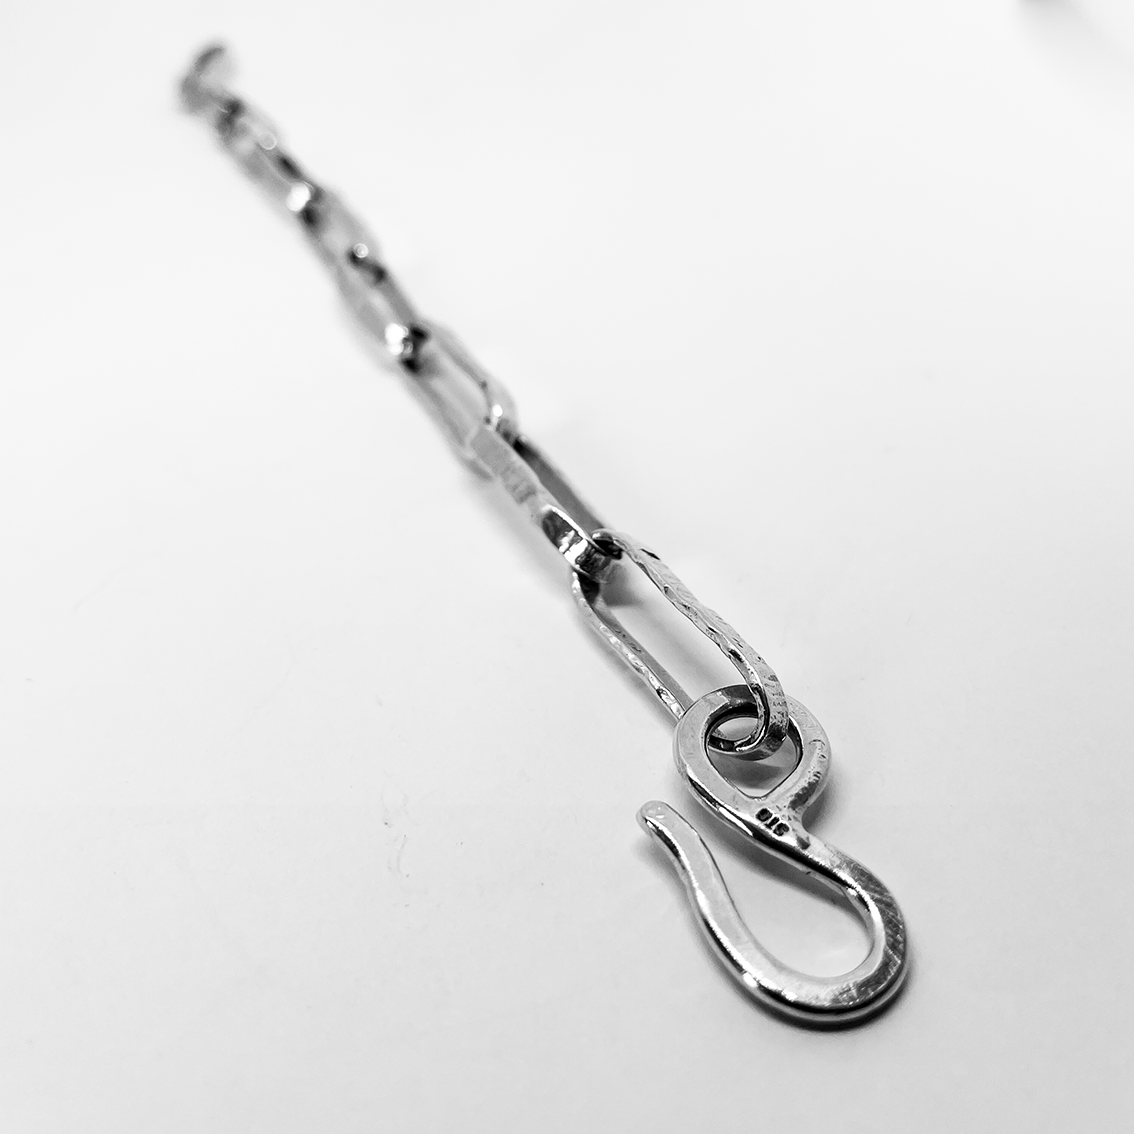 Profile of the Oval Link Chain Bracelet focusing on the clasp